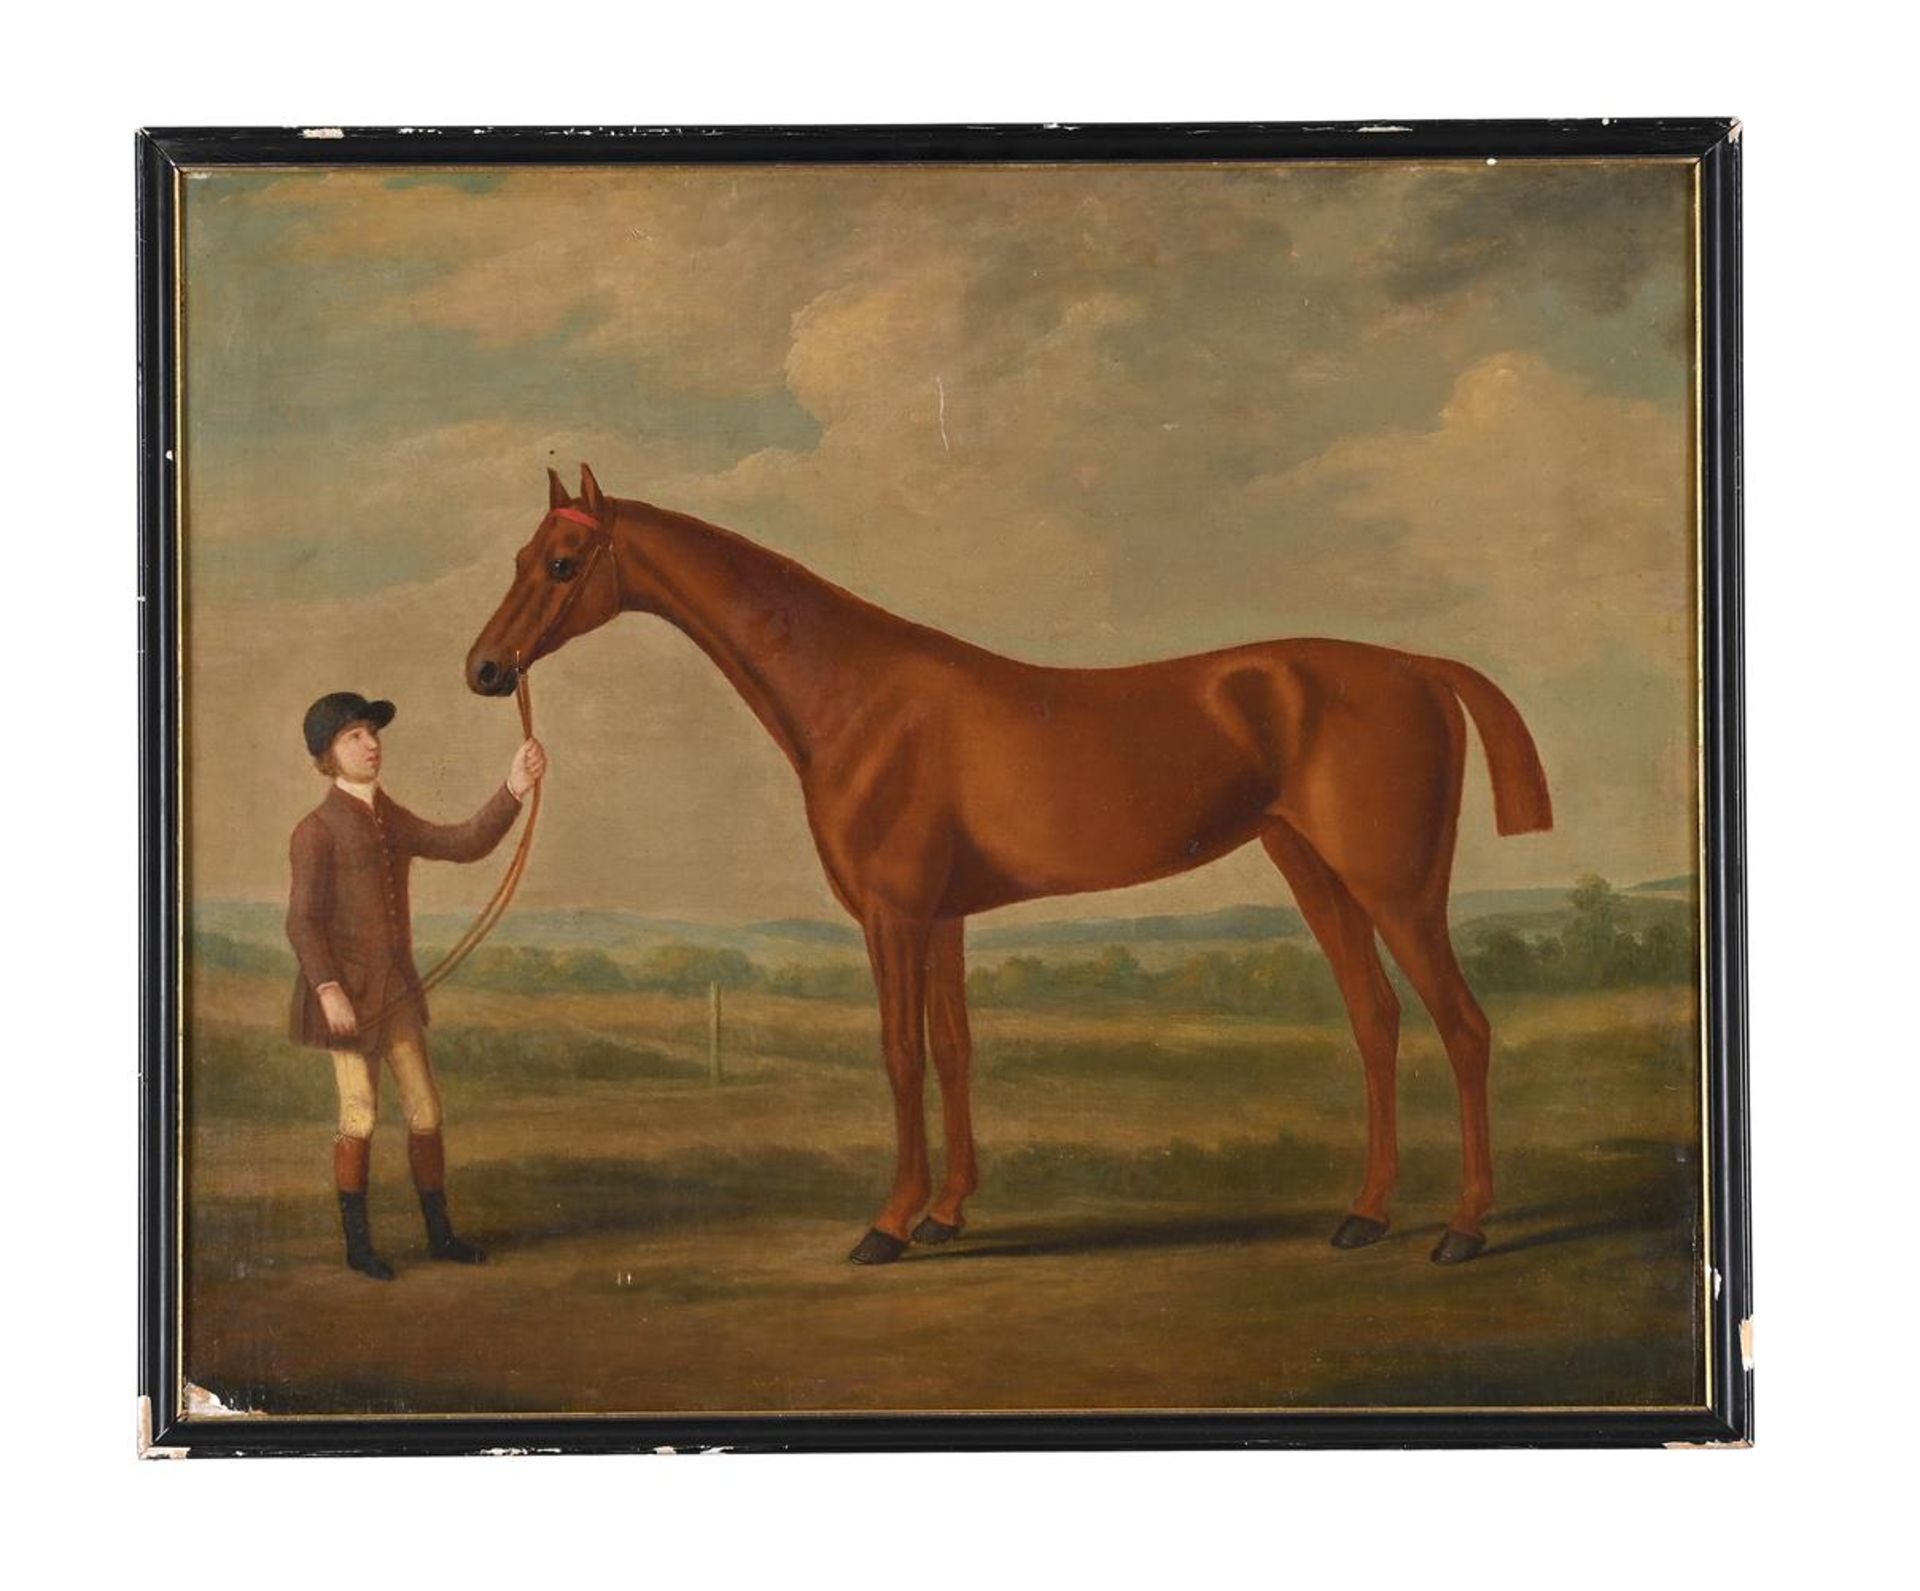 FRANCIS SARTORIUS (BRITISH 1734-1804), A CHESTNUT HORSE AND A GROOM - Image 2 of 3